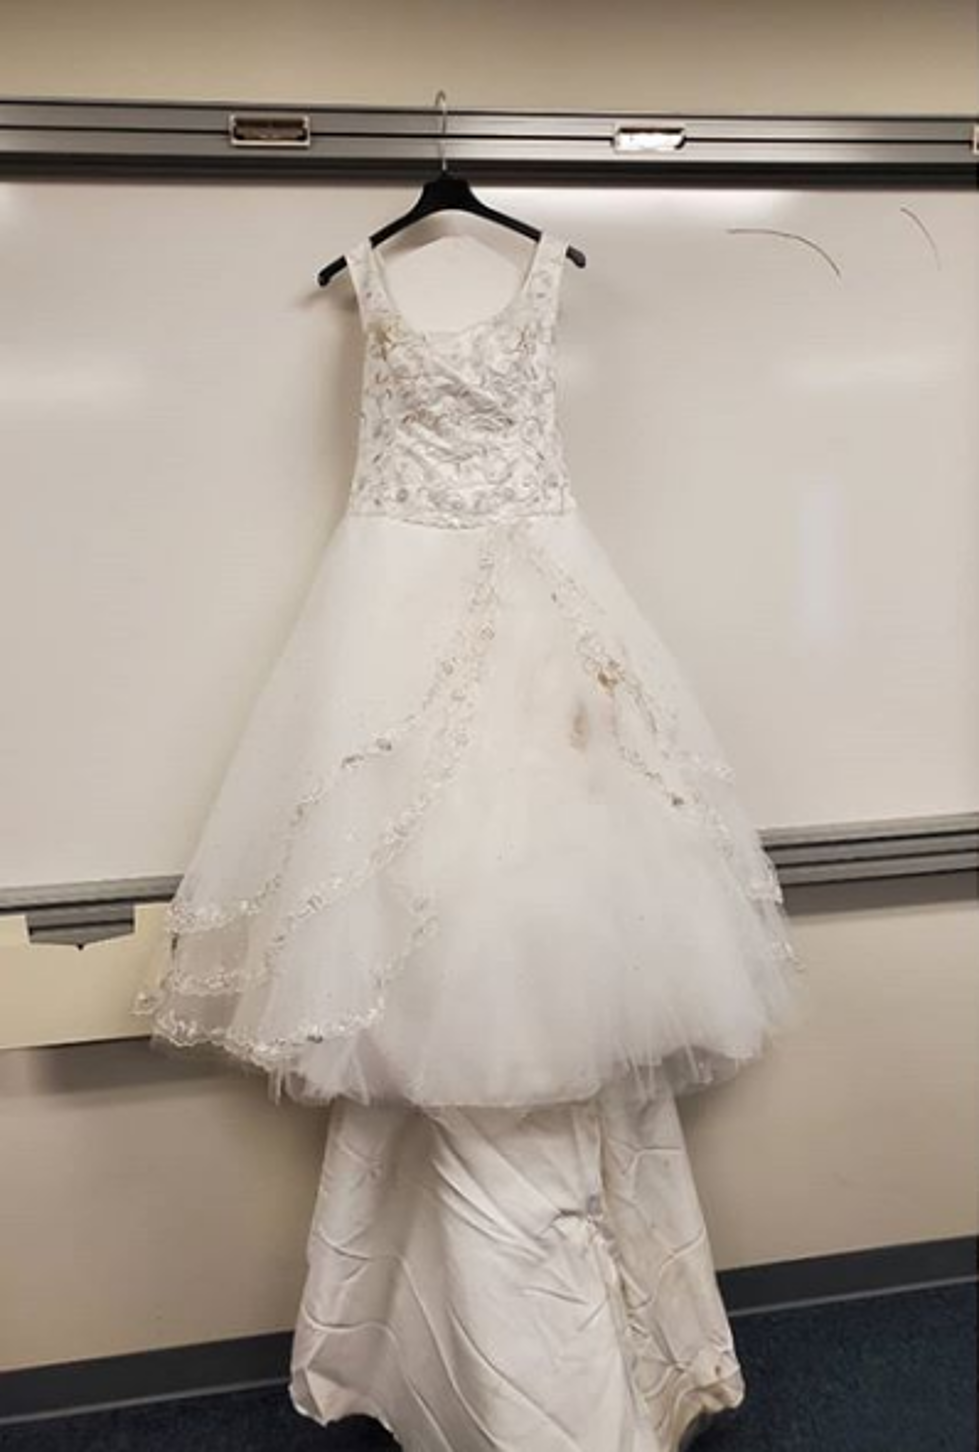 Maine State Police: Discarded Wedding Dress Left on The Highway